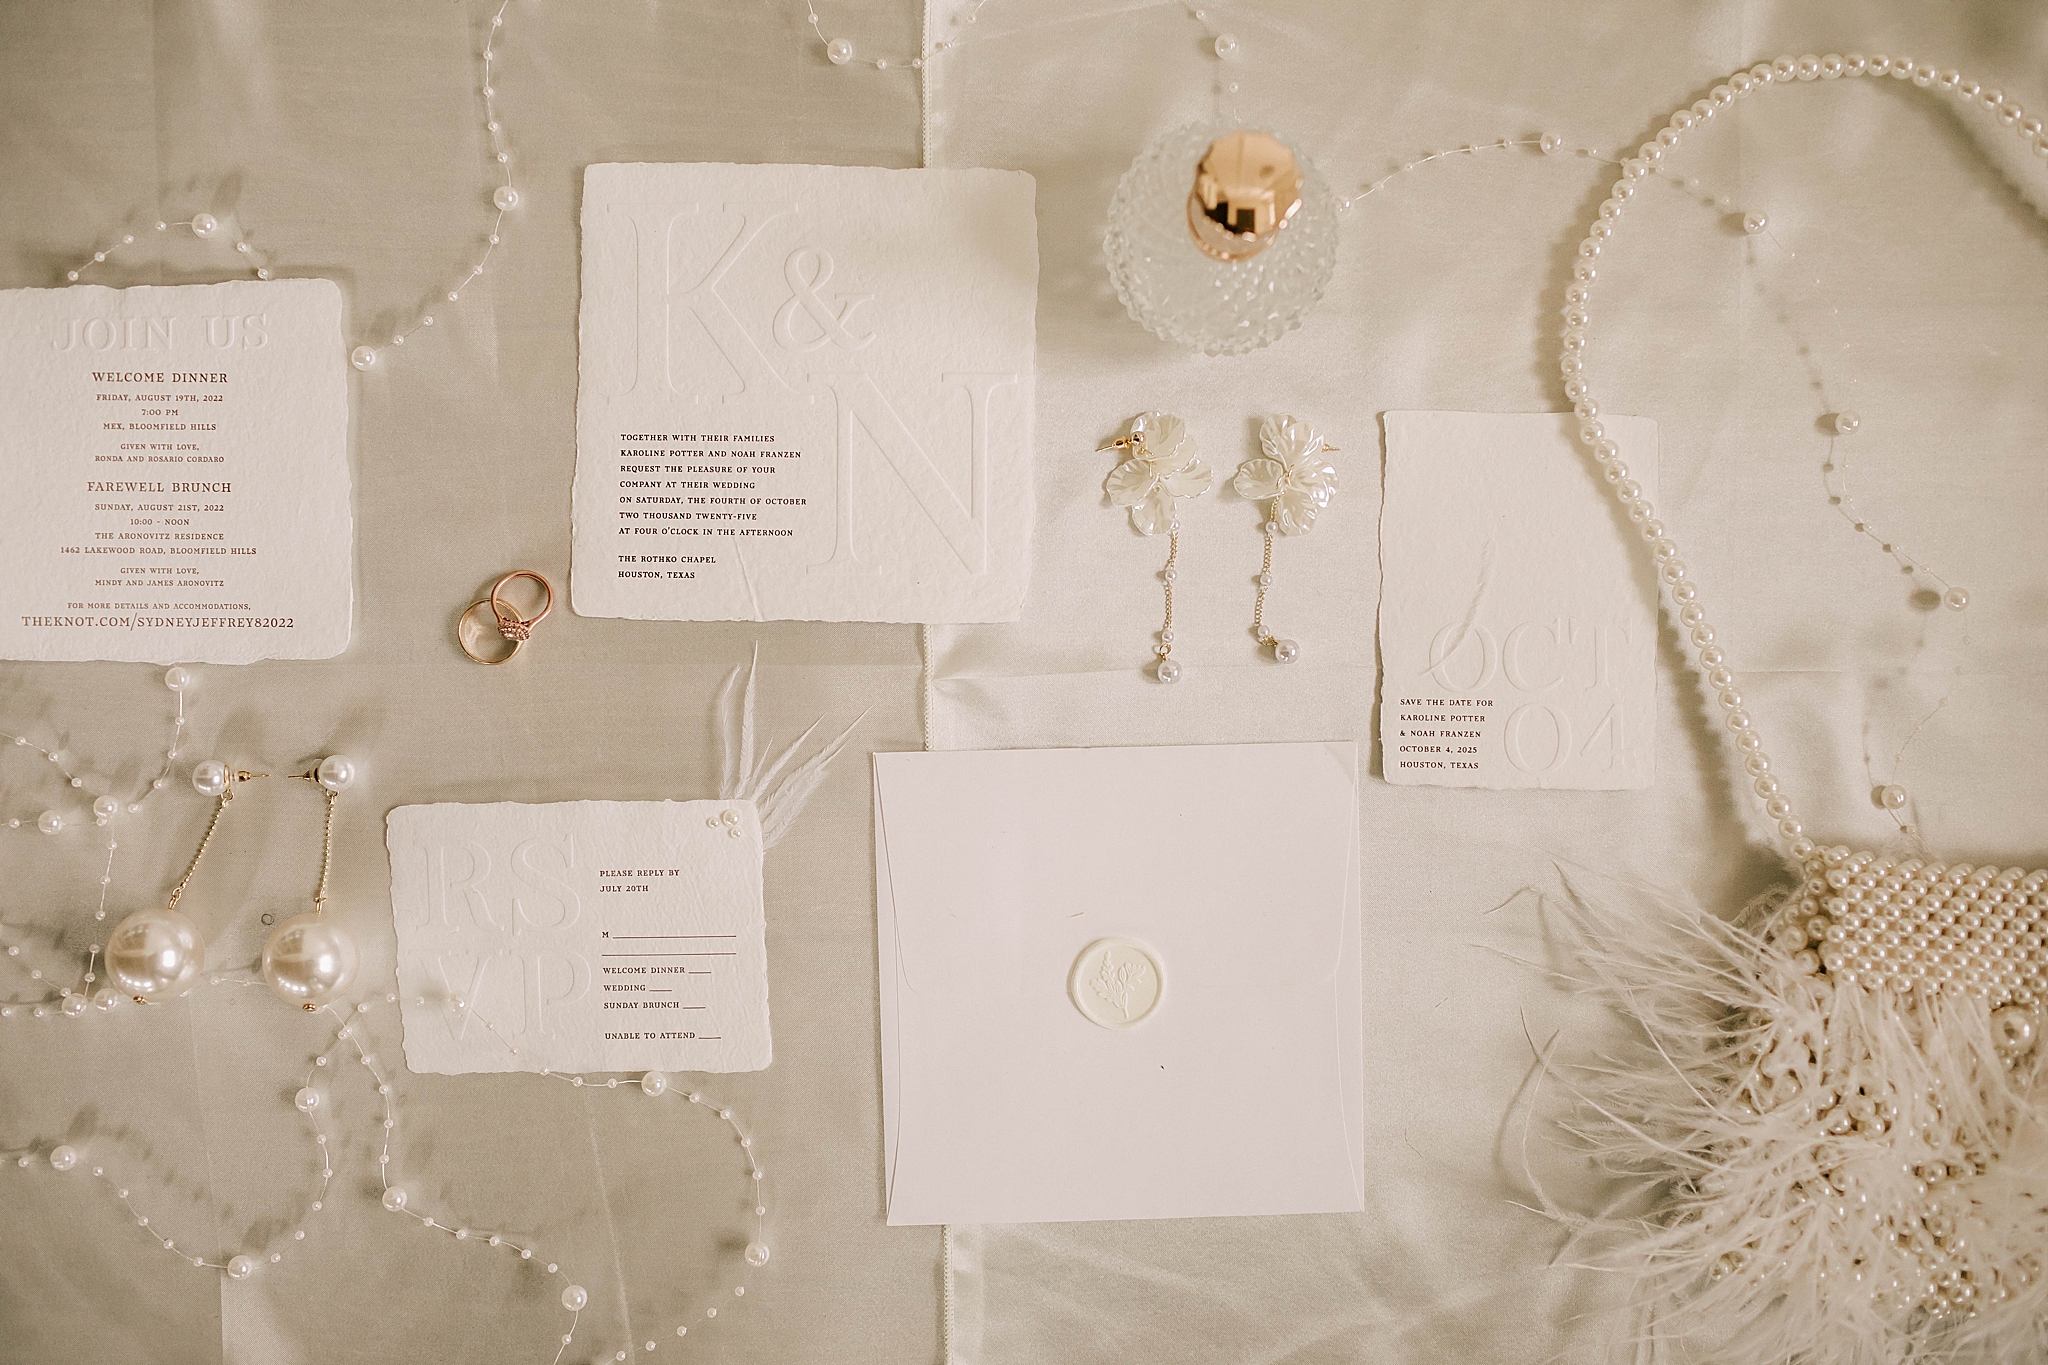 flat lay details at snow king resort wedding taken by jackson hole photographer adrian wayment photo.